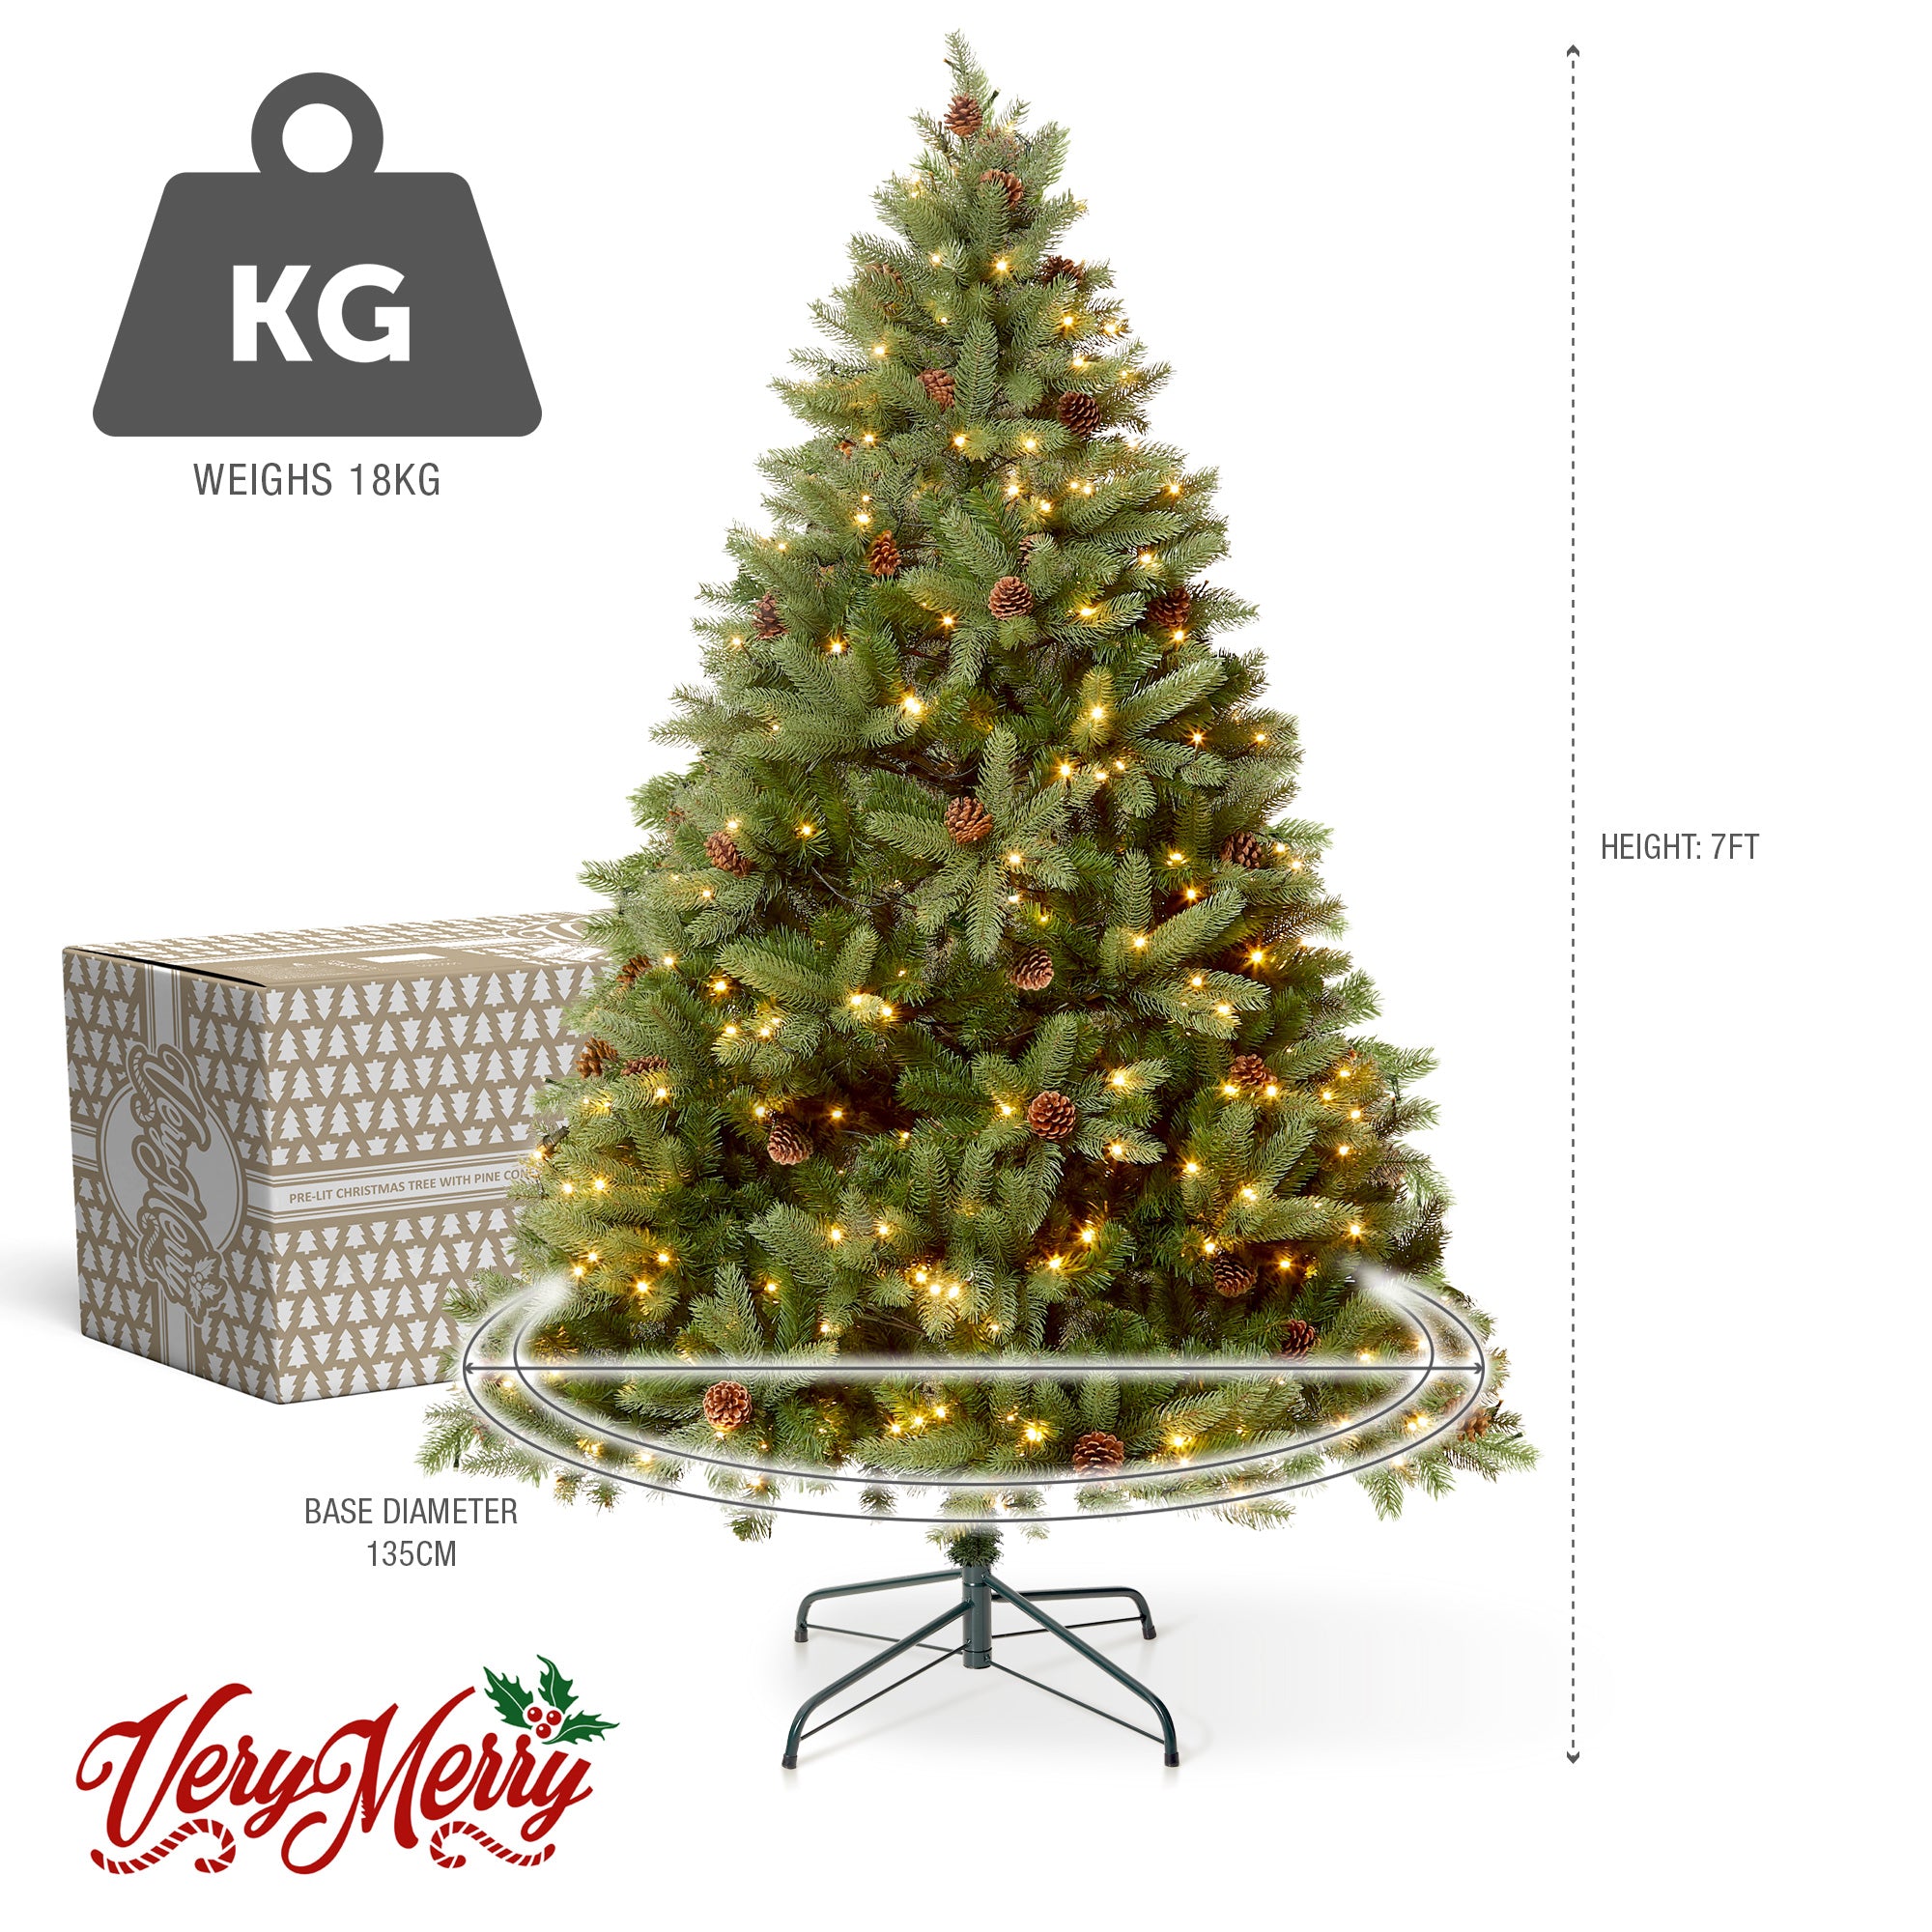 VeryMerry 7FT 'Ascot' Pre-Lit Christmas Tree with 400 Built-In Warm White LED Lights with Auto-Off Timer, 8 Lighting Modes and Real Decorative Pinecones